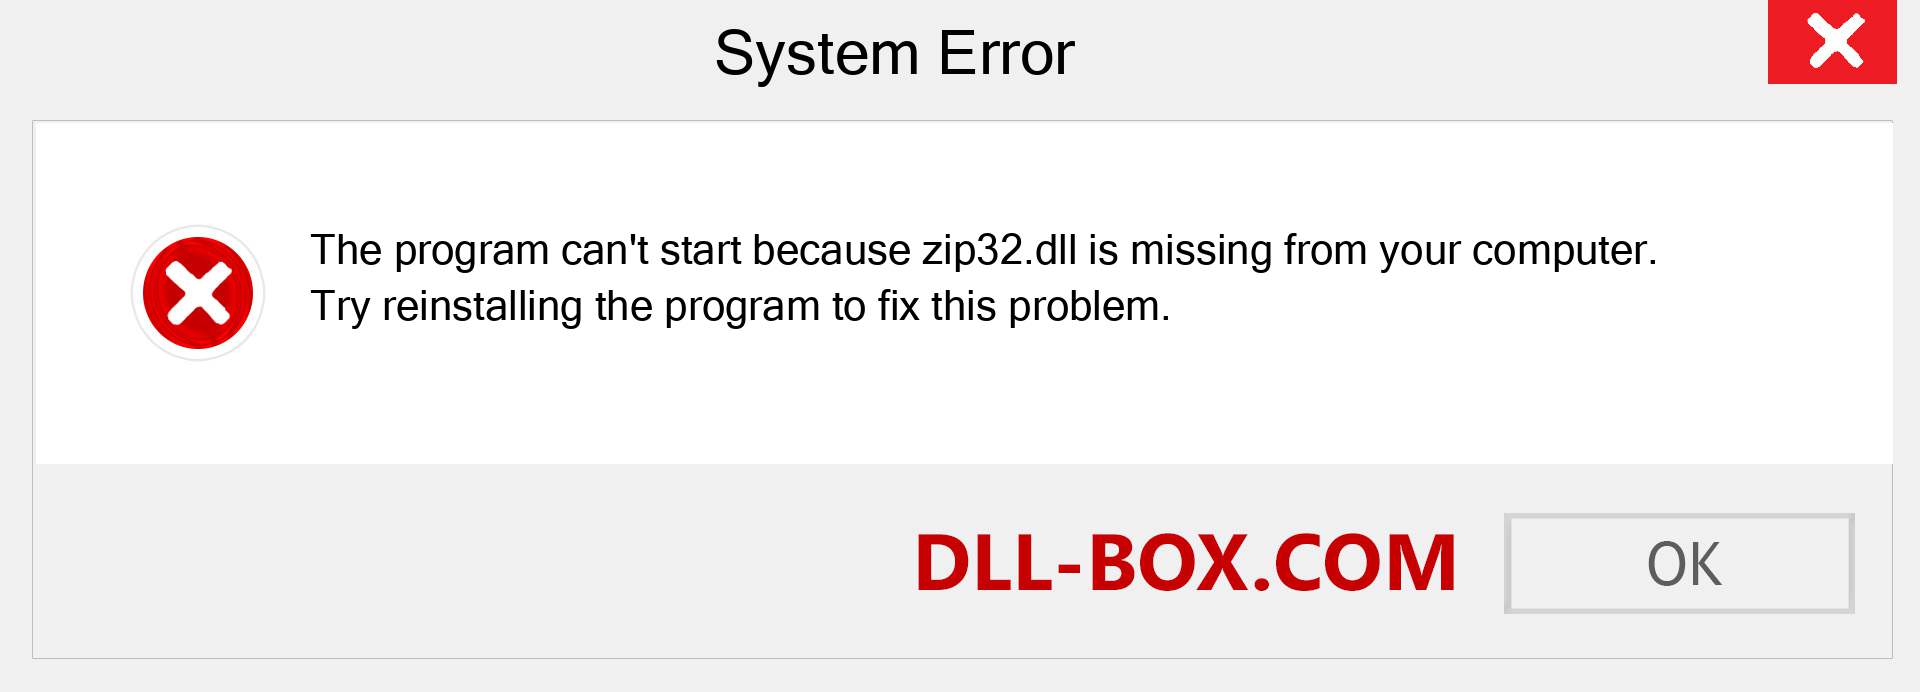  zip32.dll file is missing?. Download for Windows 7, 8, 10 - Fix  zip32 dll Missing Error on Windows, photos, images